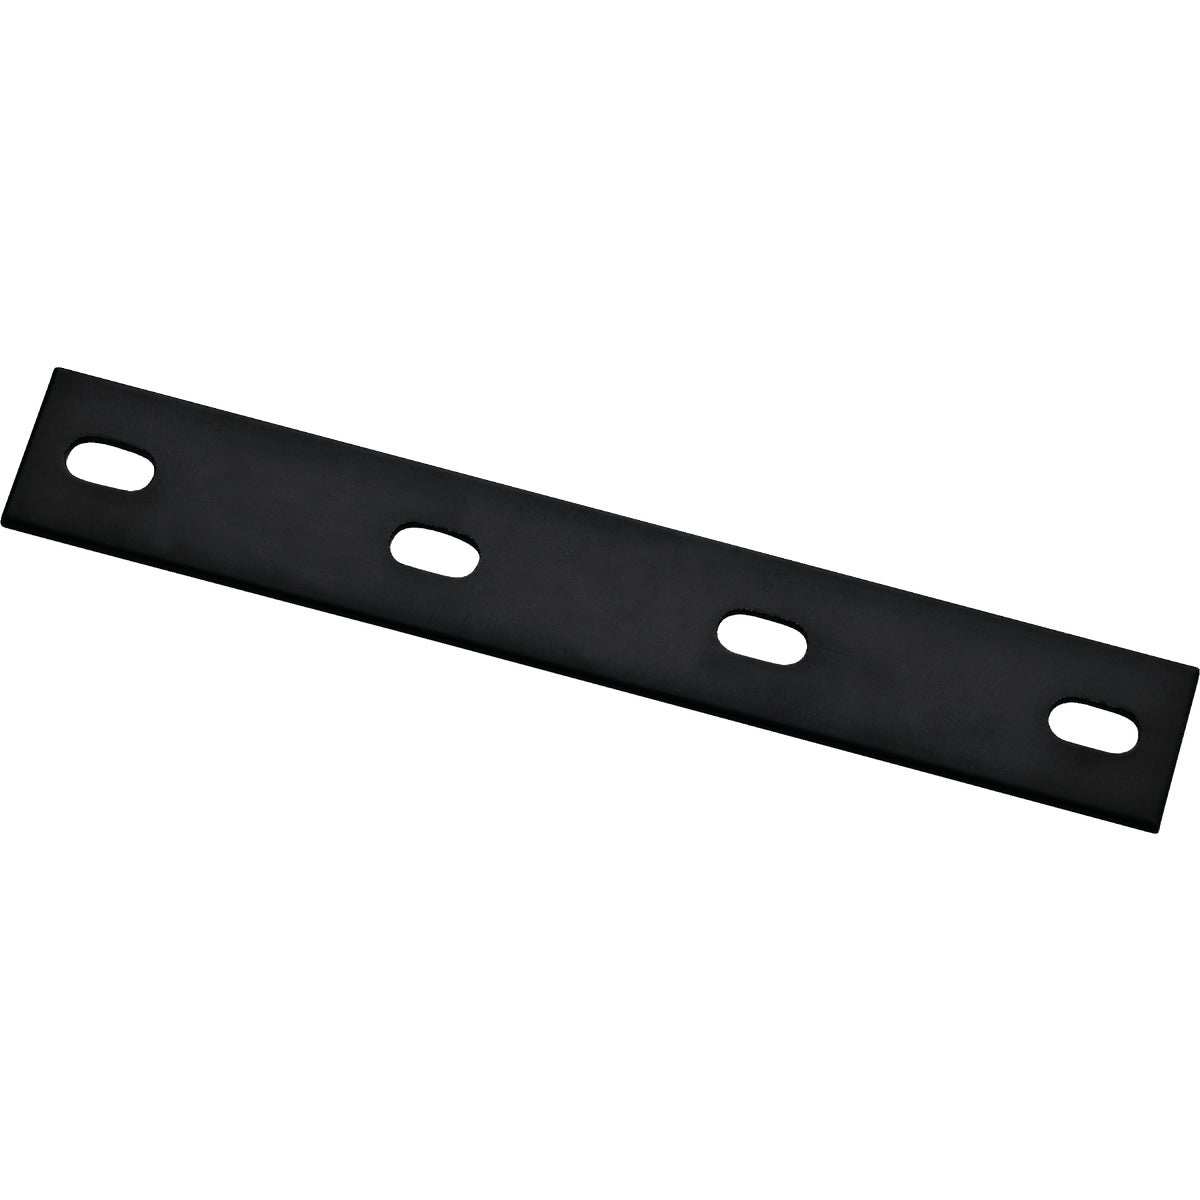 National Catalog 1181BC 10 In. x 1-1/2 In. Black Heavy Duty Mending Plate